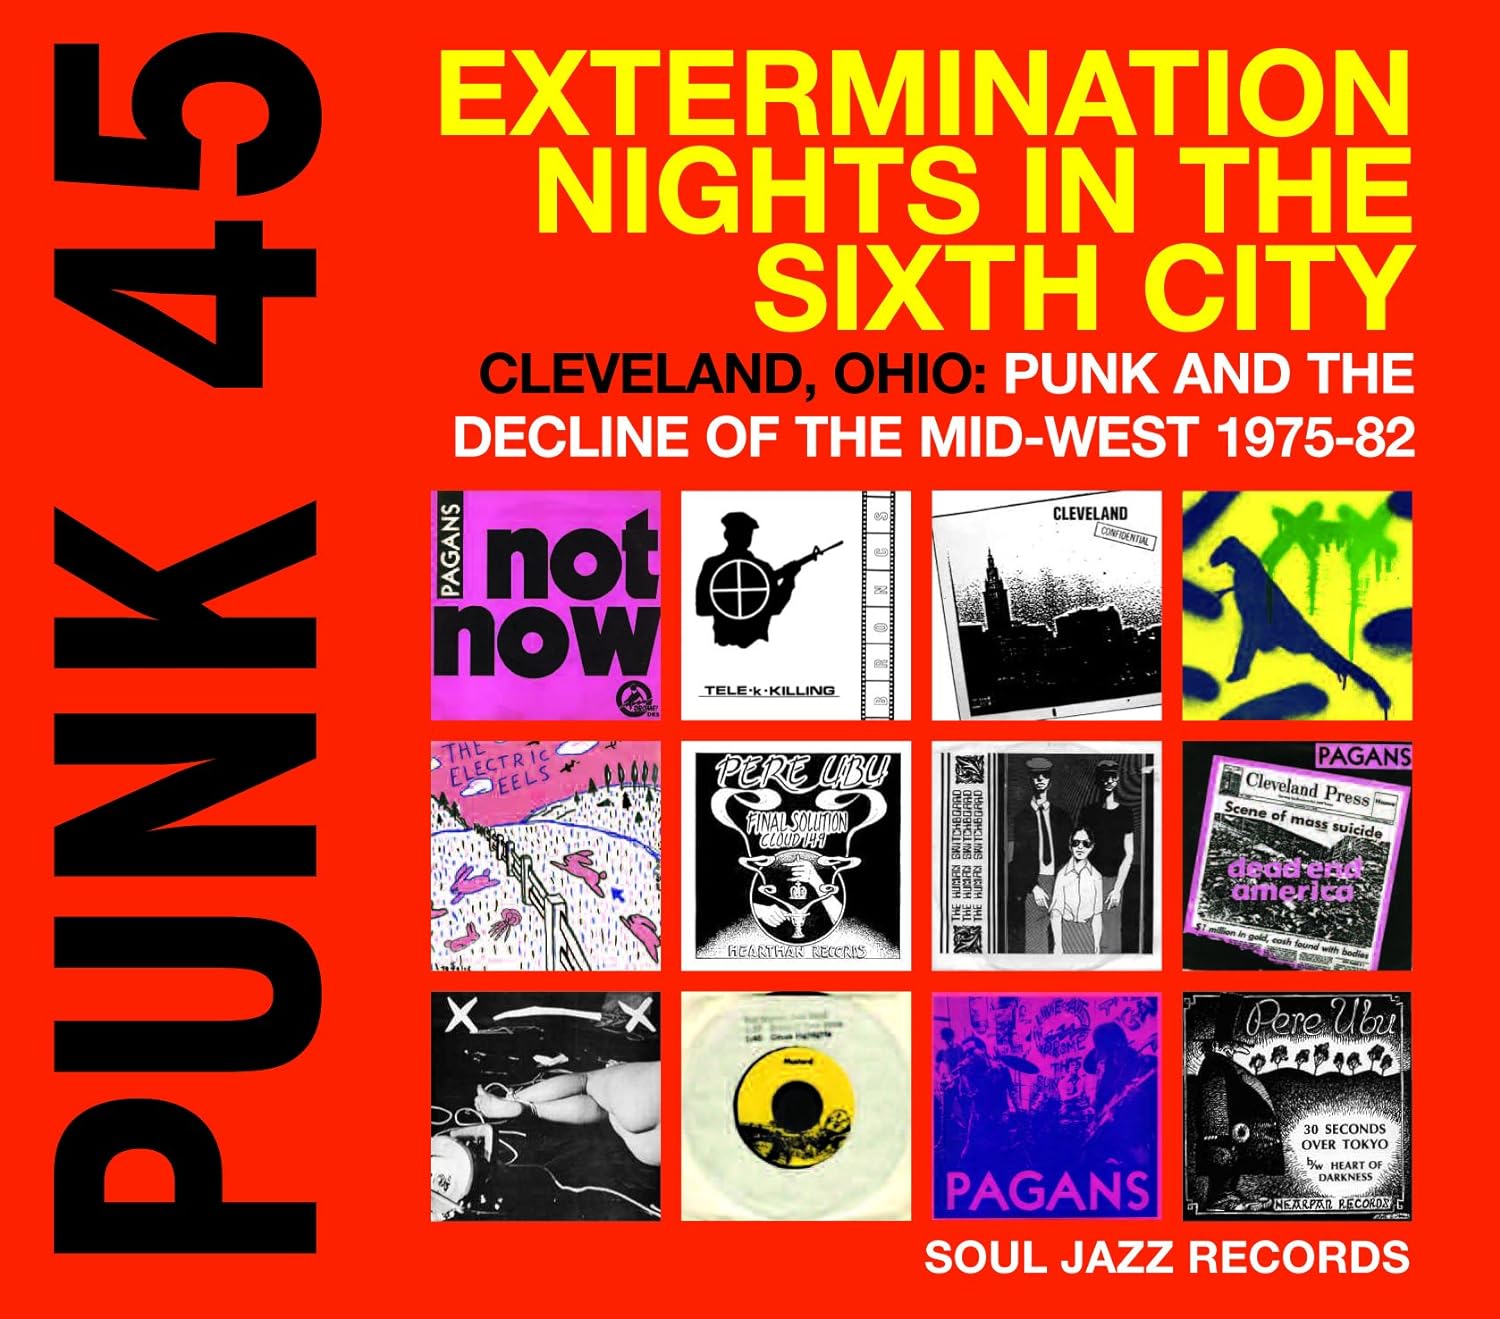 Soul Jazz Records Presents - PUNK 45: EXTERMINATION NIGHTS IN THE SIXTH CITY